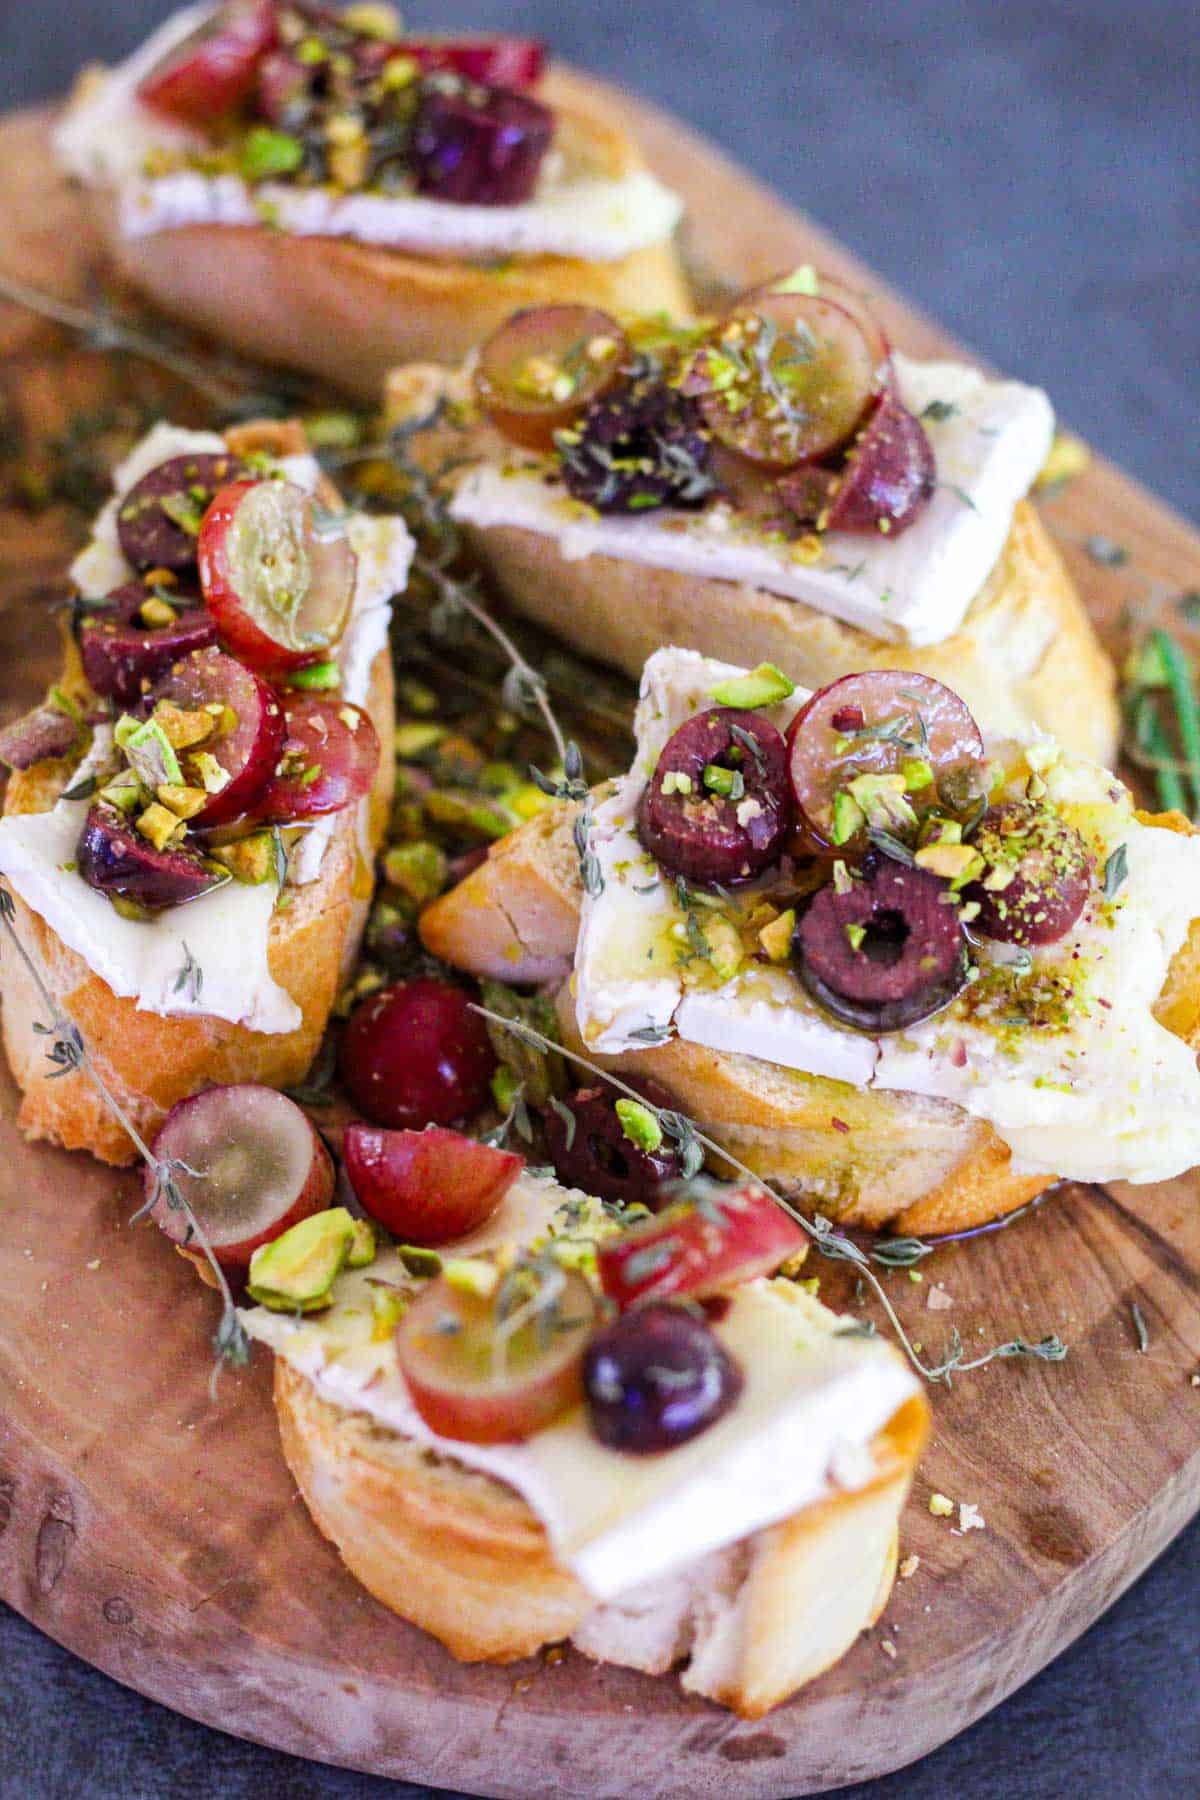 Crostinis with brie, grapes and pistachios drizzled with honey & garnished with thyme and rosemary.